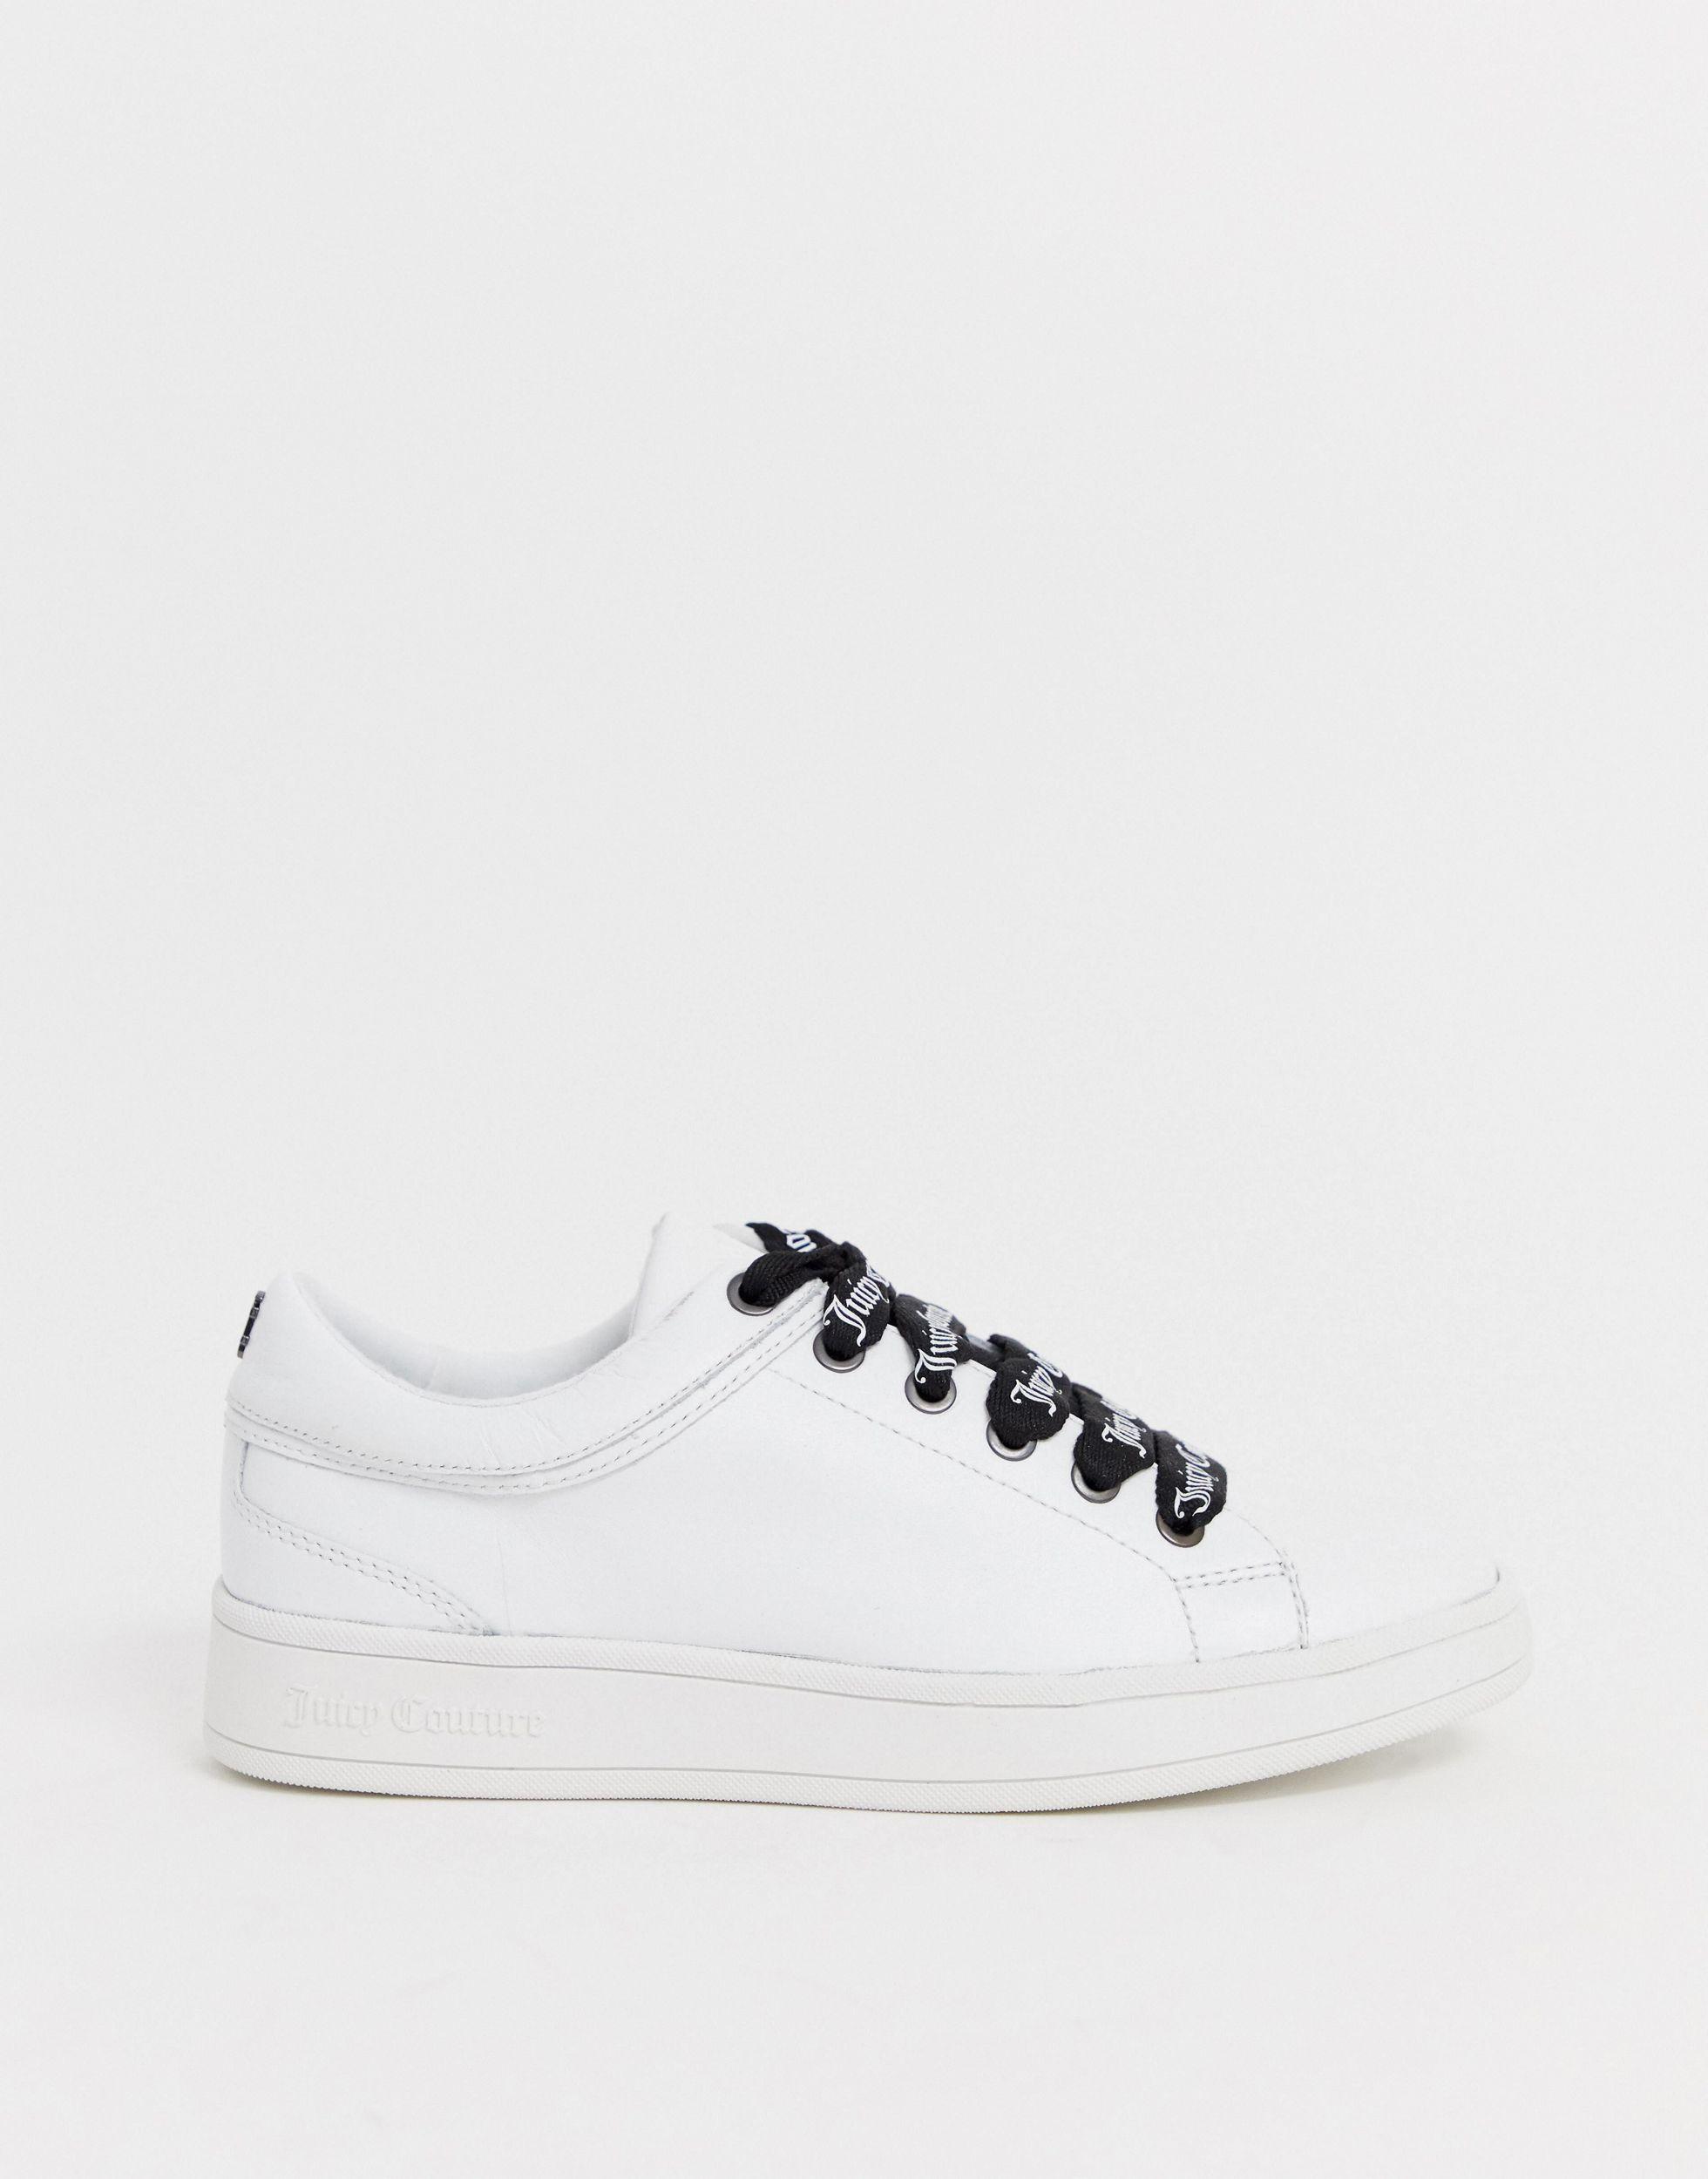 juicy couture White Leather Lace Up Sneakers